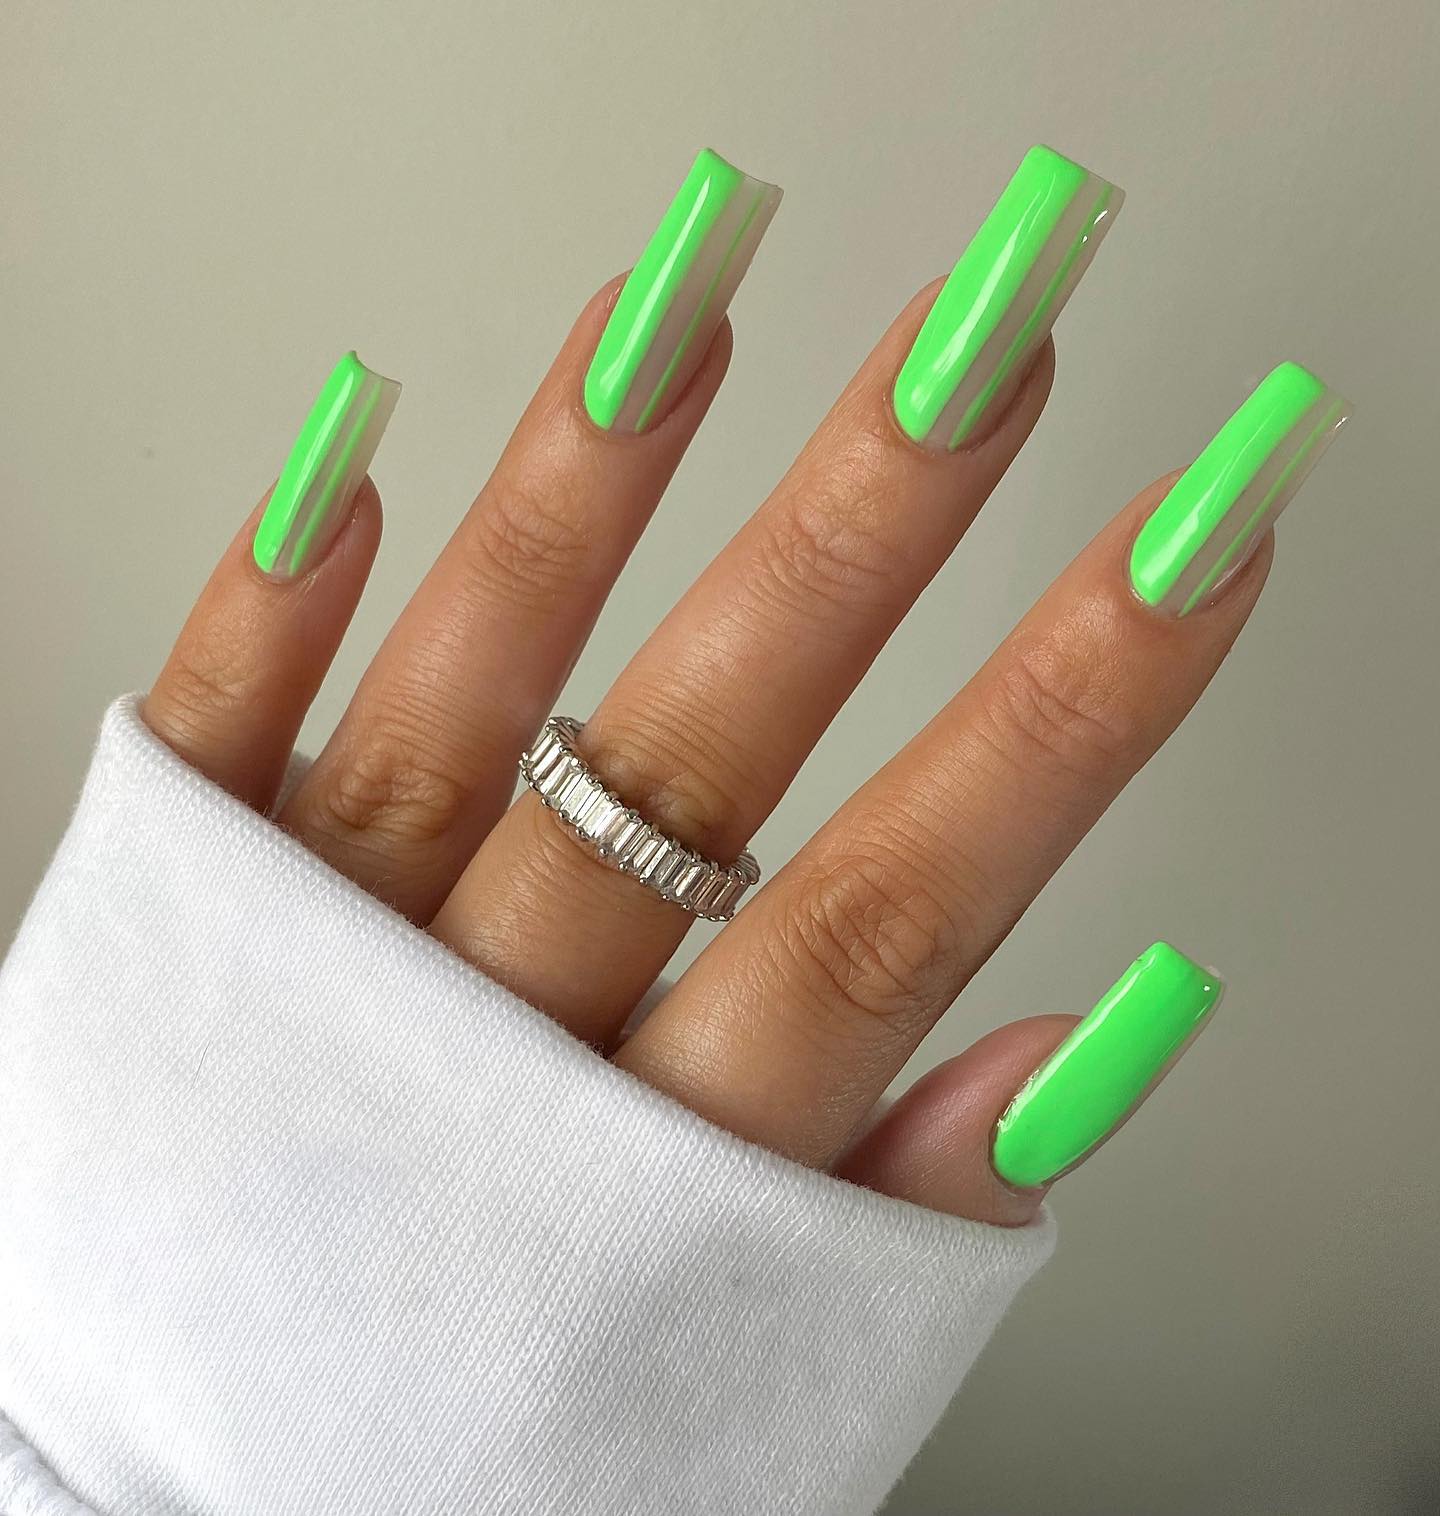 I know a chick - Lime green nails with glitter.... always with glitter...  Tinkerbell Green 😍& they glow under LED light! Whoa! A couple of sneaky  nail apps available this week coming